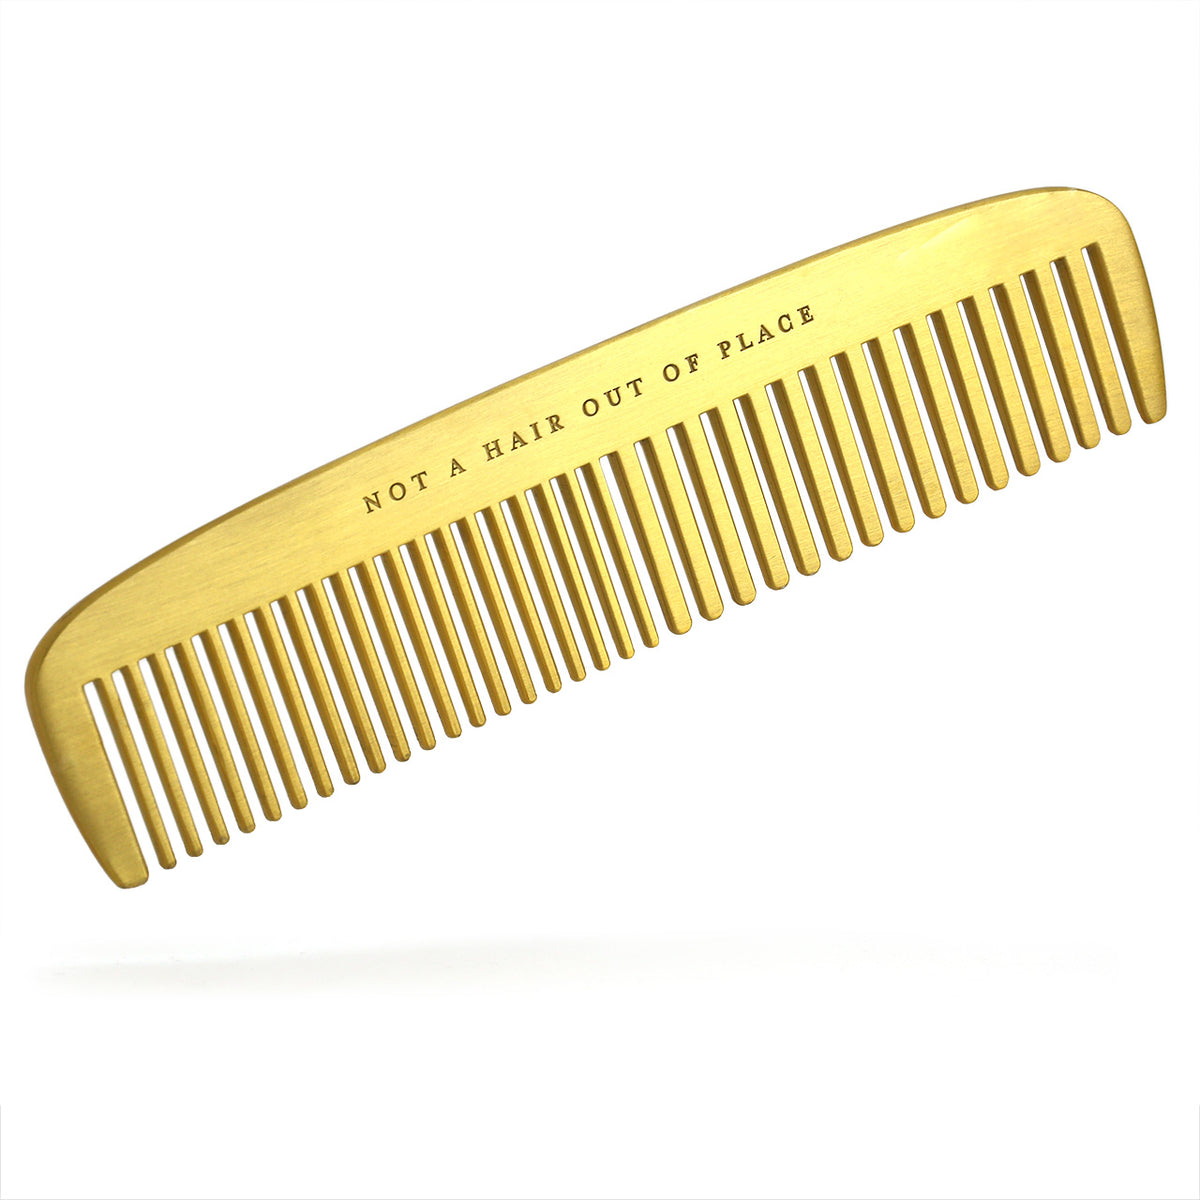 &quot;Not a hair out of place&quot; engraved Brass comb